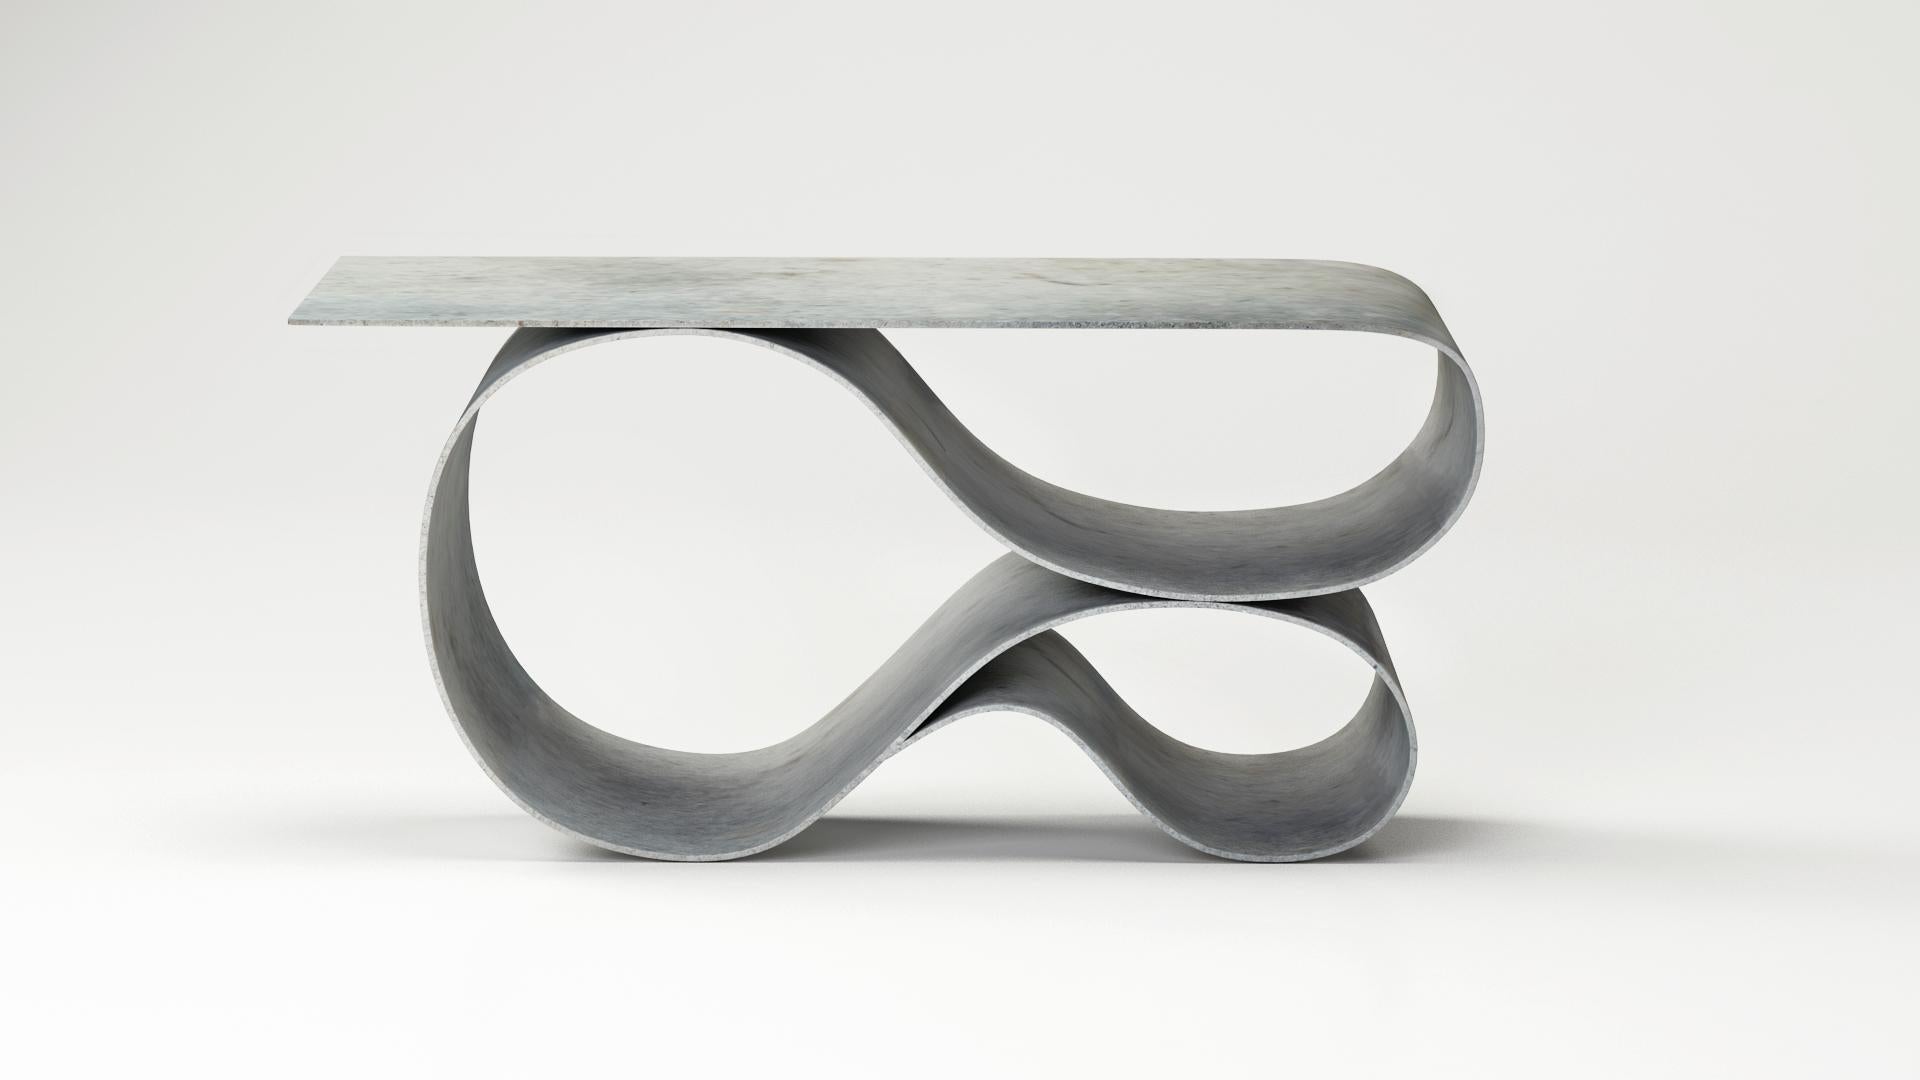 Whorl Console in Concrete Canvas by Neal Aronowitz Design
Dimensions: D 160 x W 43 x H 76 cm
Materials: Concrete canvas, cement mortar, cement pigments.
Customization Options:
Custom colors in any available cement pigment or combination.
Size